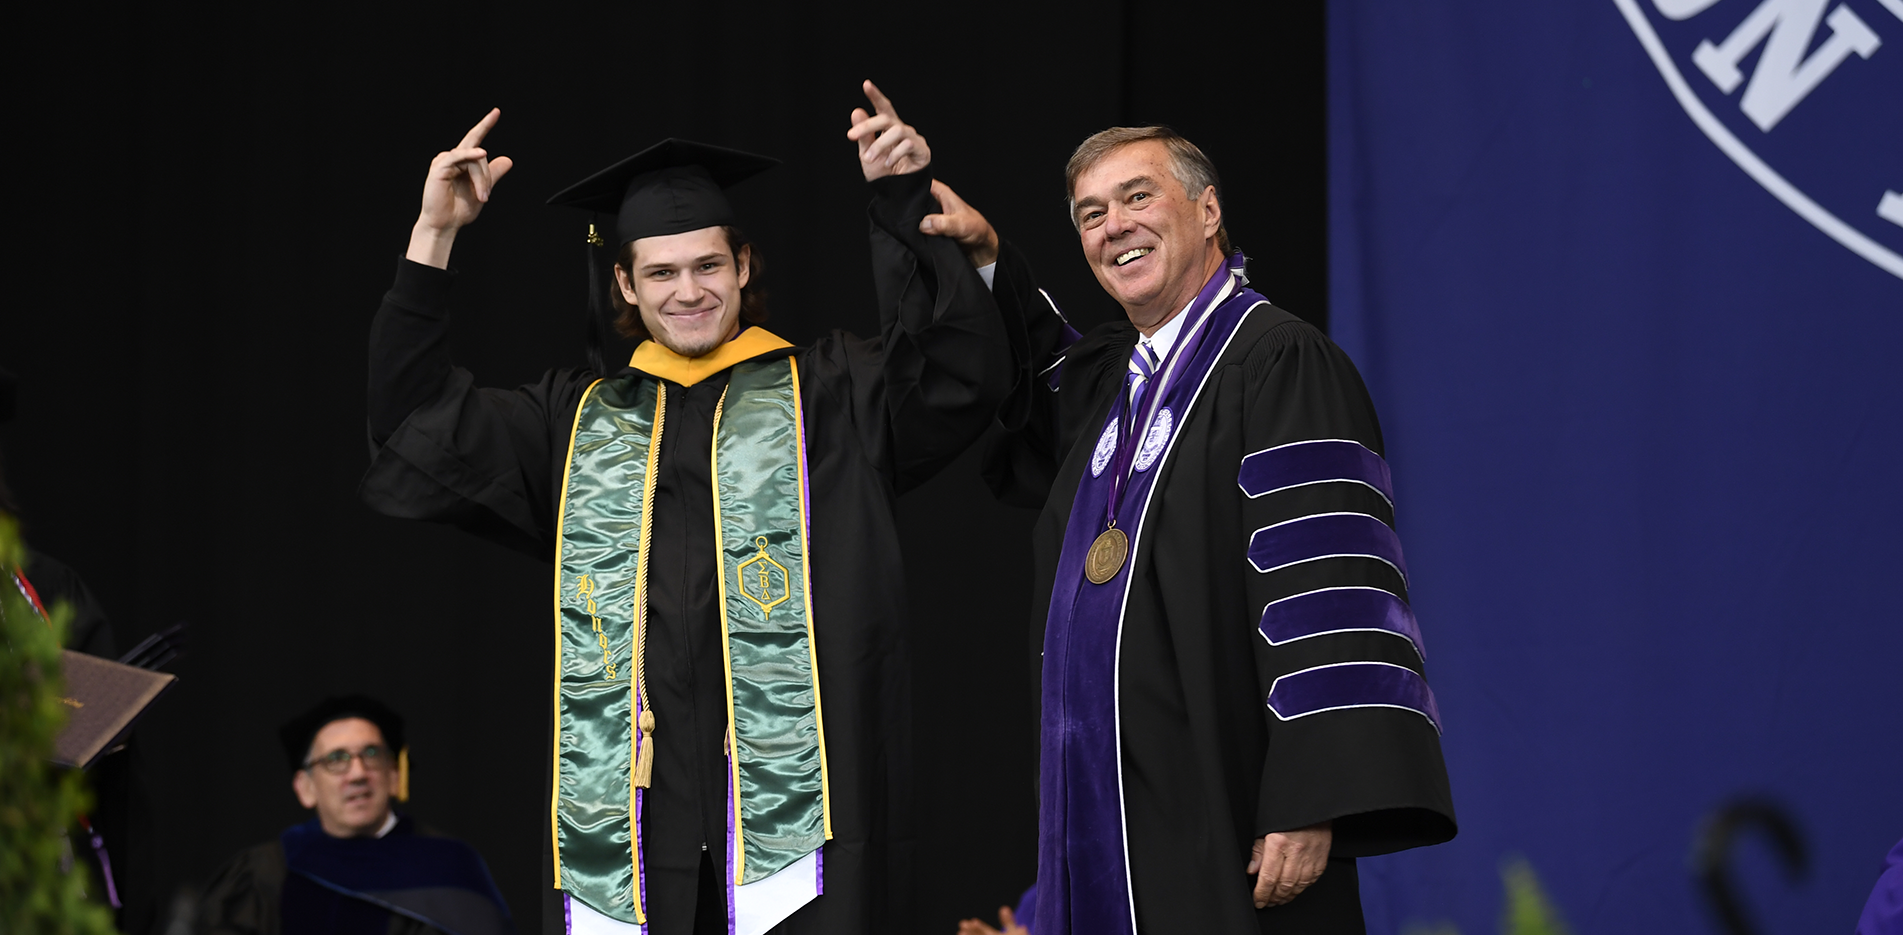 President Kenneth K. Quigley, Jr. and Mark Zhukov at the 2023 Curry College Commencement at Xfinity Center